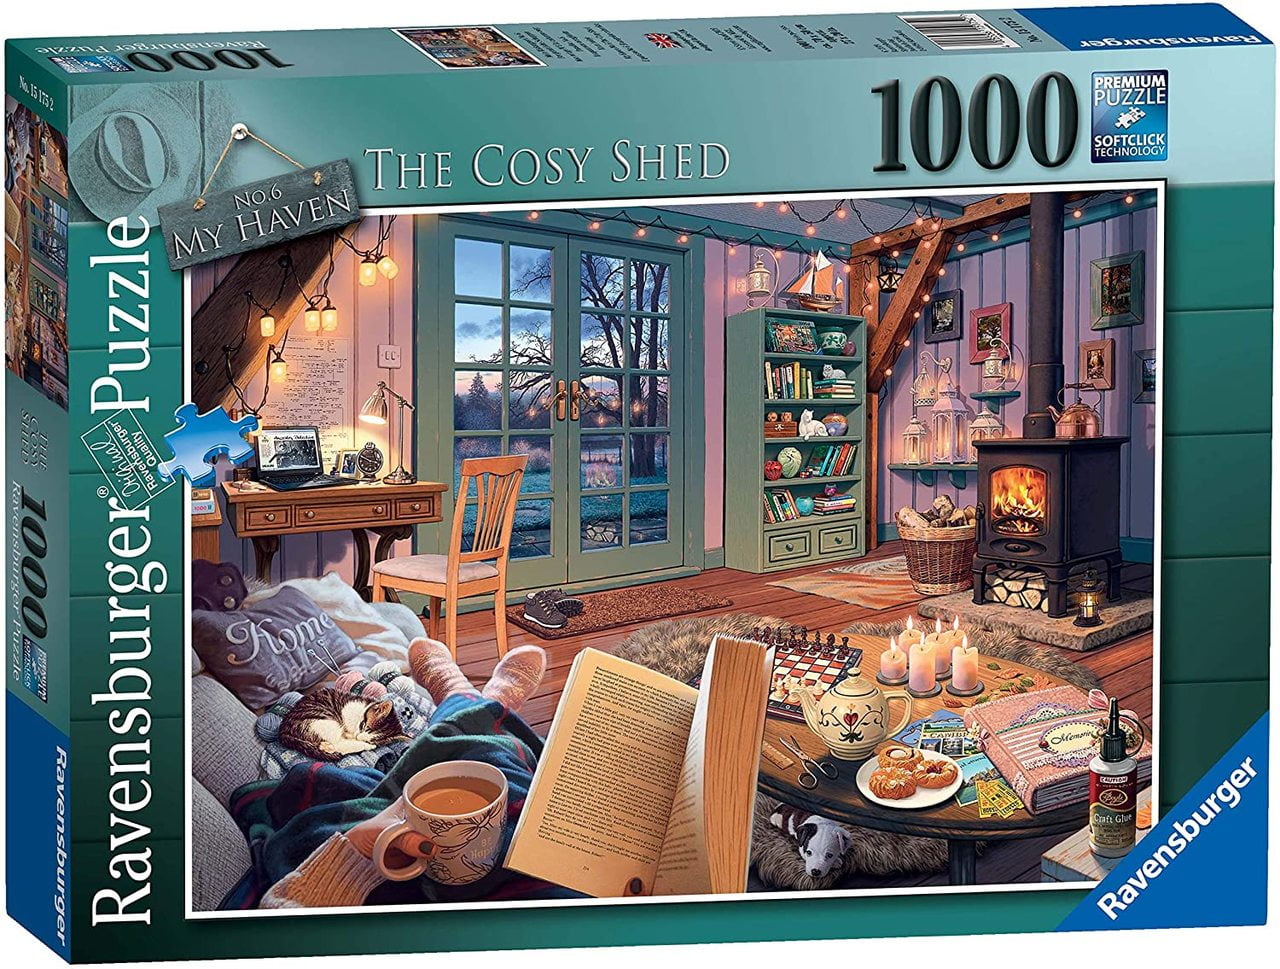 My Haven No.6 The Cosy Shed  1000pc Jigsaw Puzzle Ravensburger 